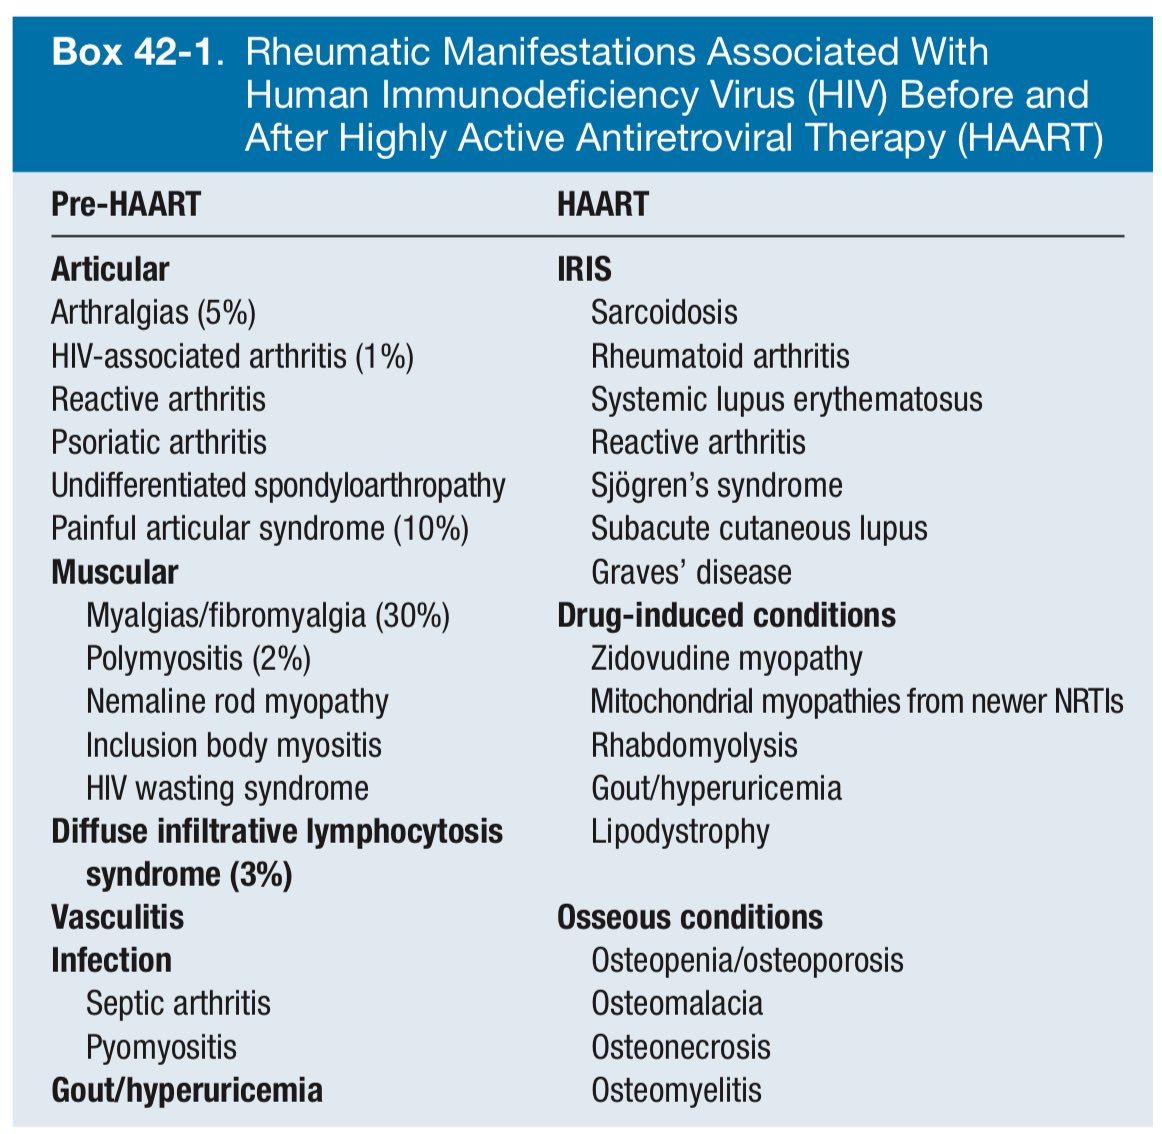 Rheumatic manifestations associated with #HIV BEFORE & AFTER Antiretroviral therapy (#HAART)
#Rheumatology #MedTwitter 👇